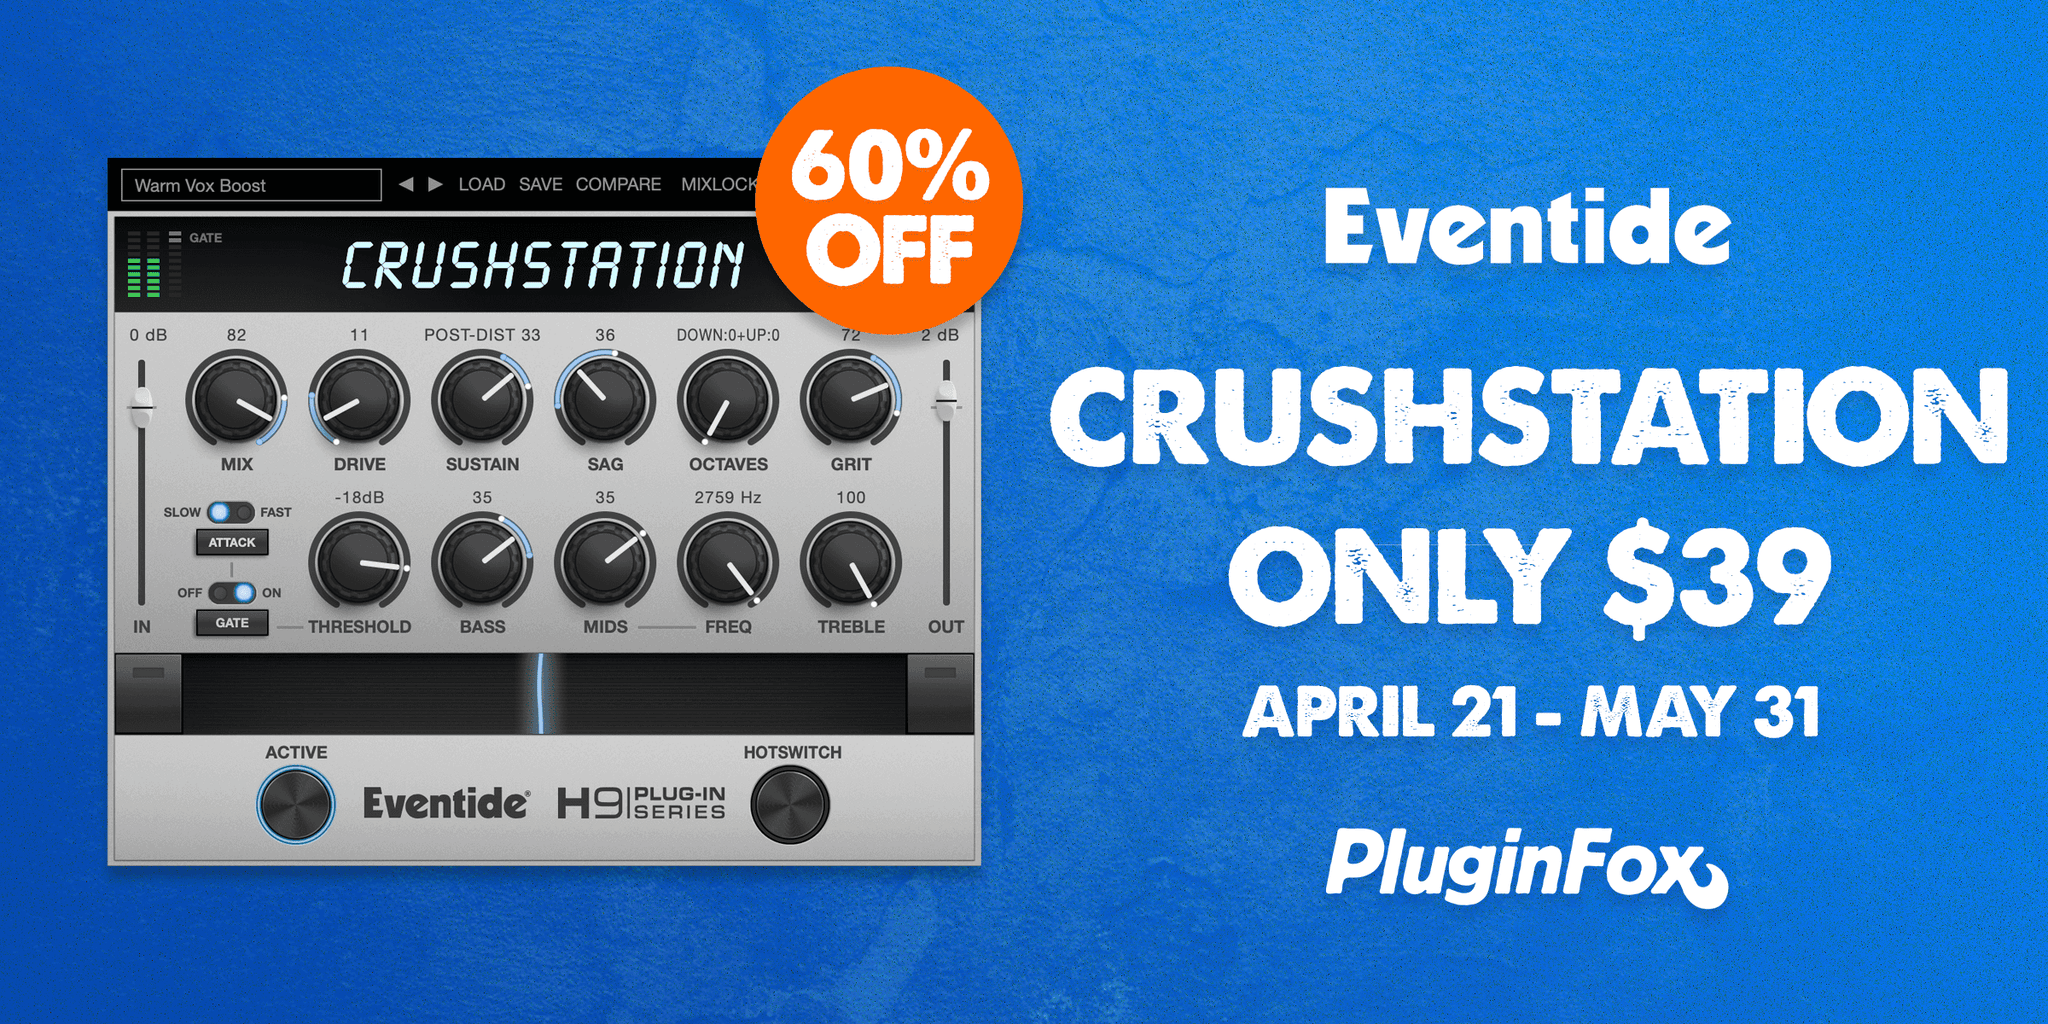 Eventide CrushStation Intro - April 21 - May 31